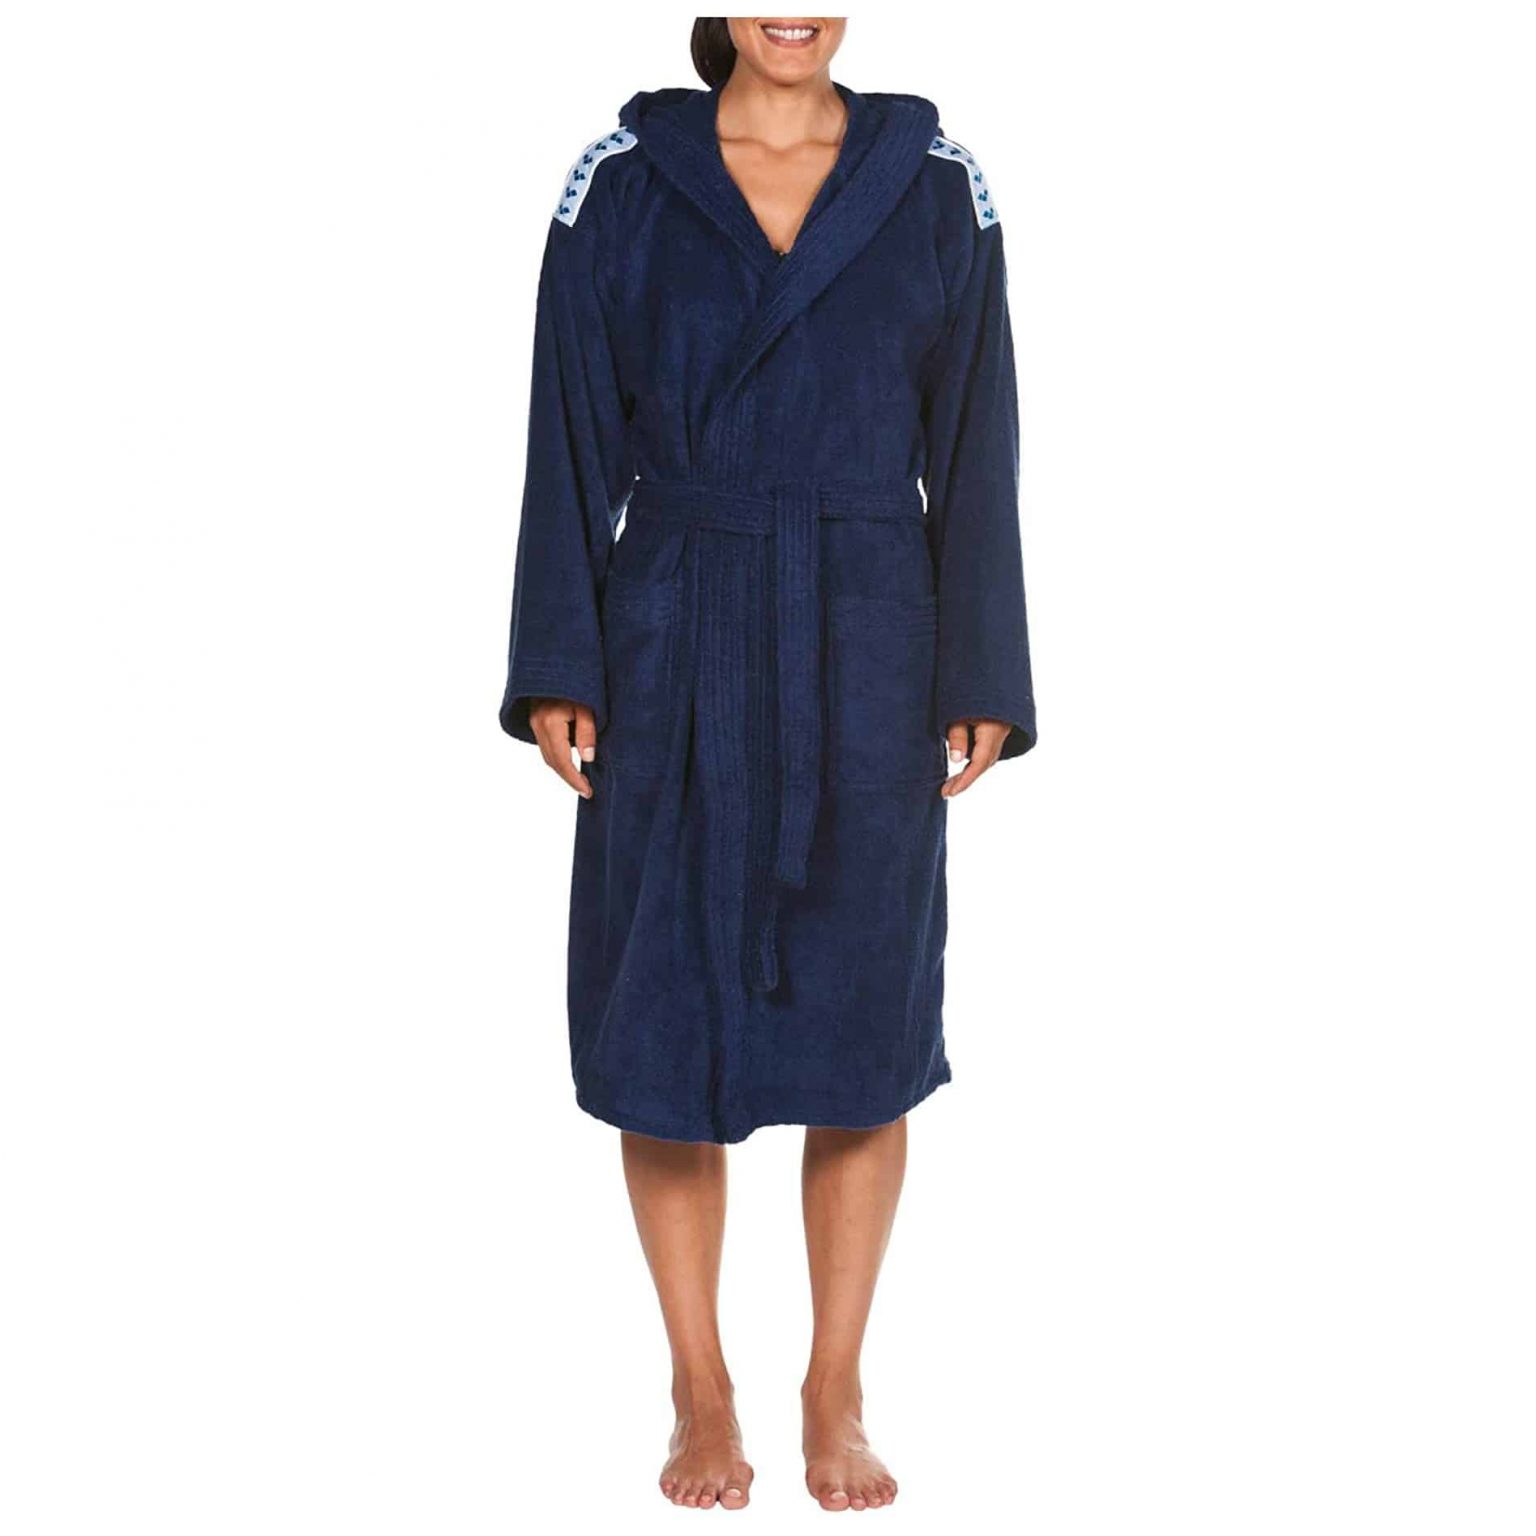 Top 10 Best Adult Robes in 2021 Reviews | Buyer's Guide